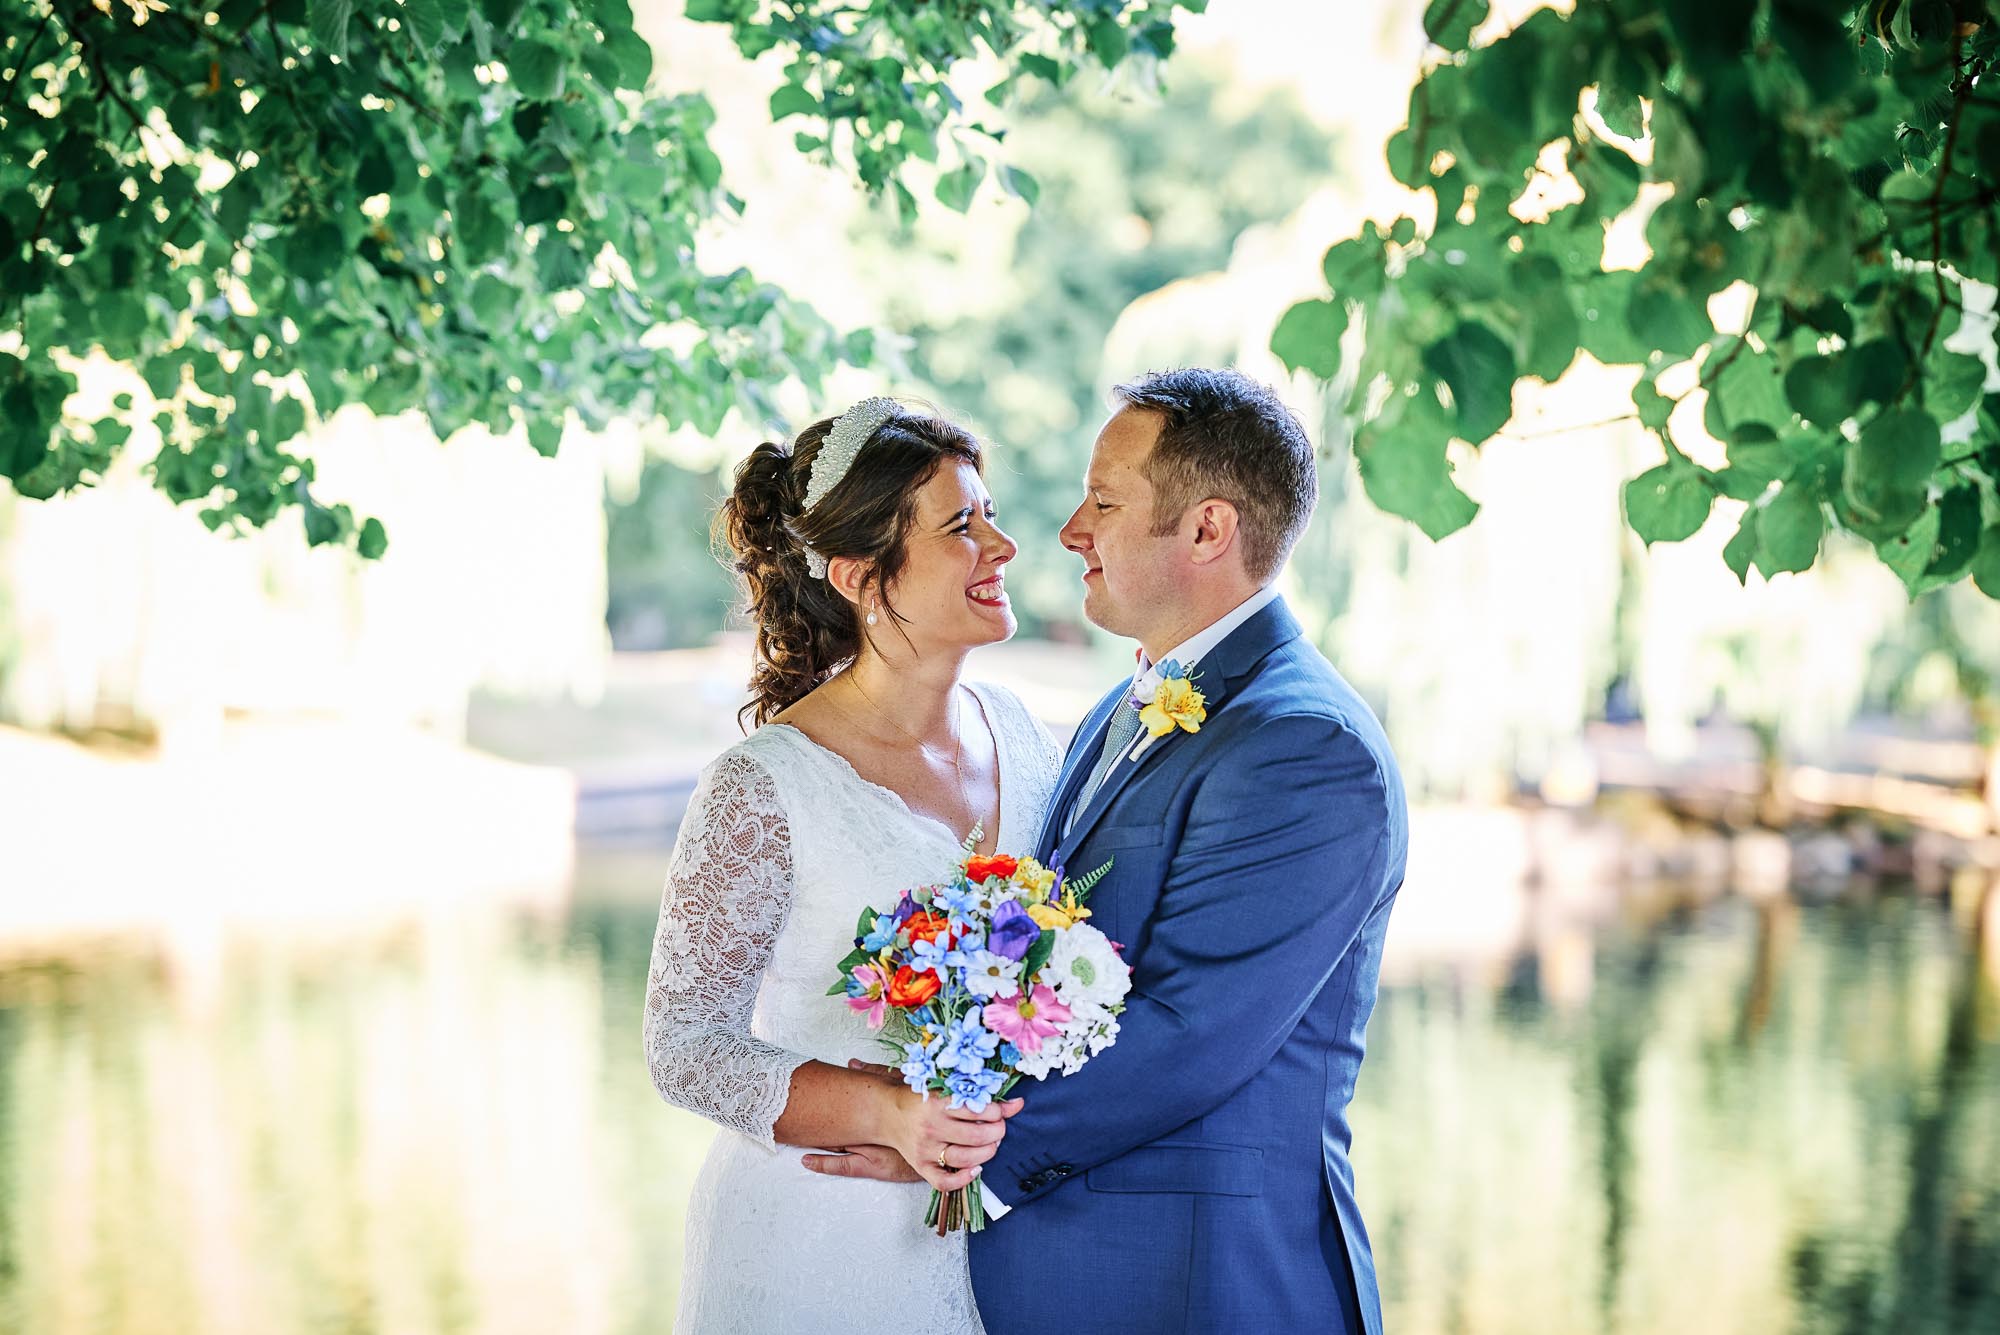 Best Recommended Wedding Photographer Henley Rooms Hotel Indigo Chris Fossey Photography AM